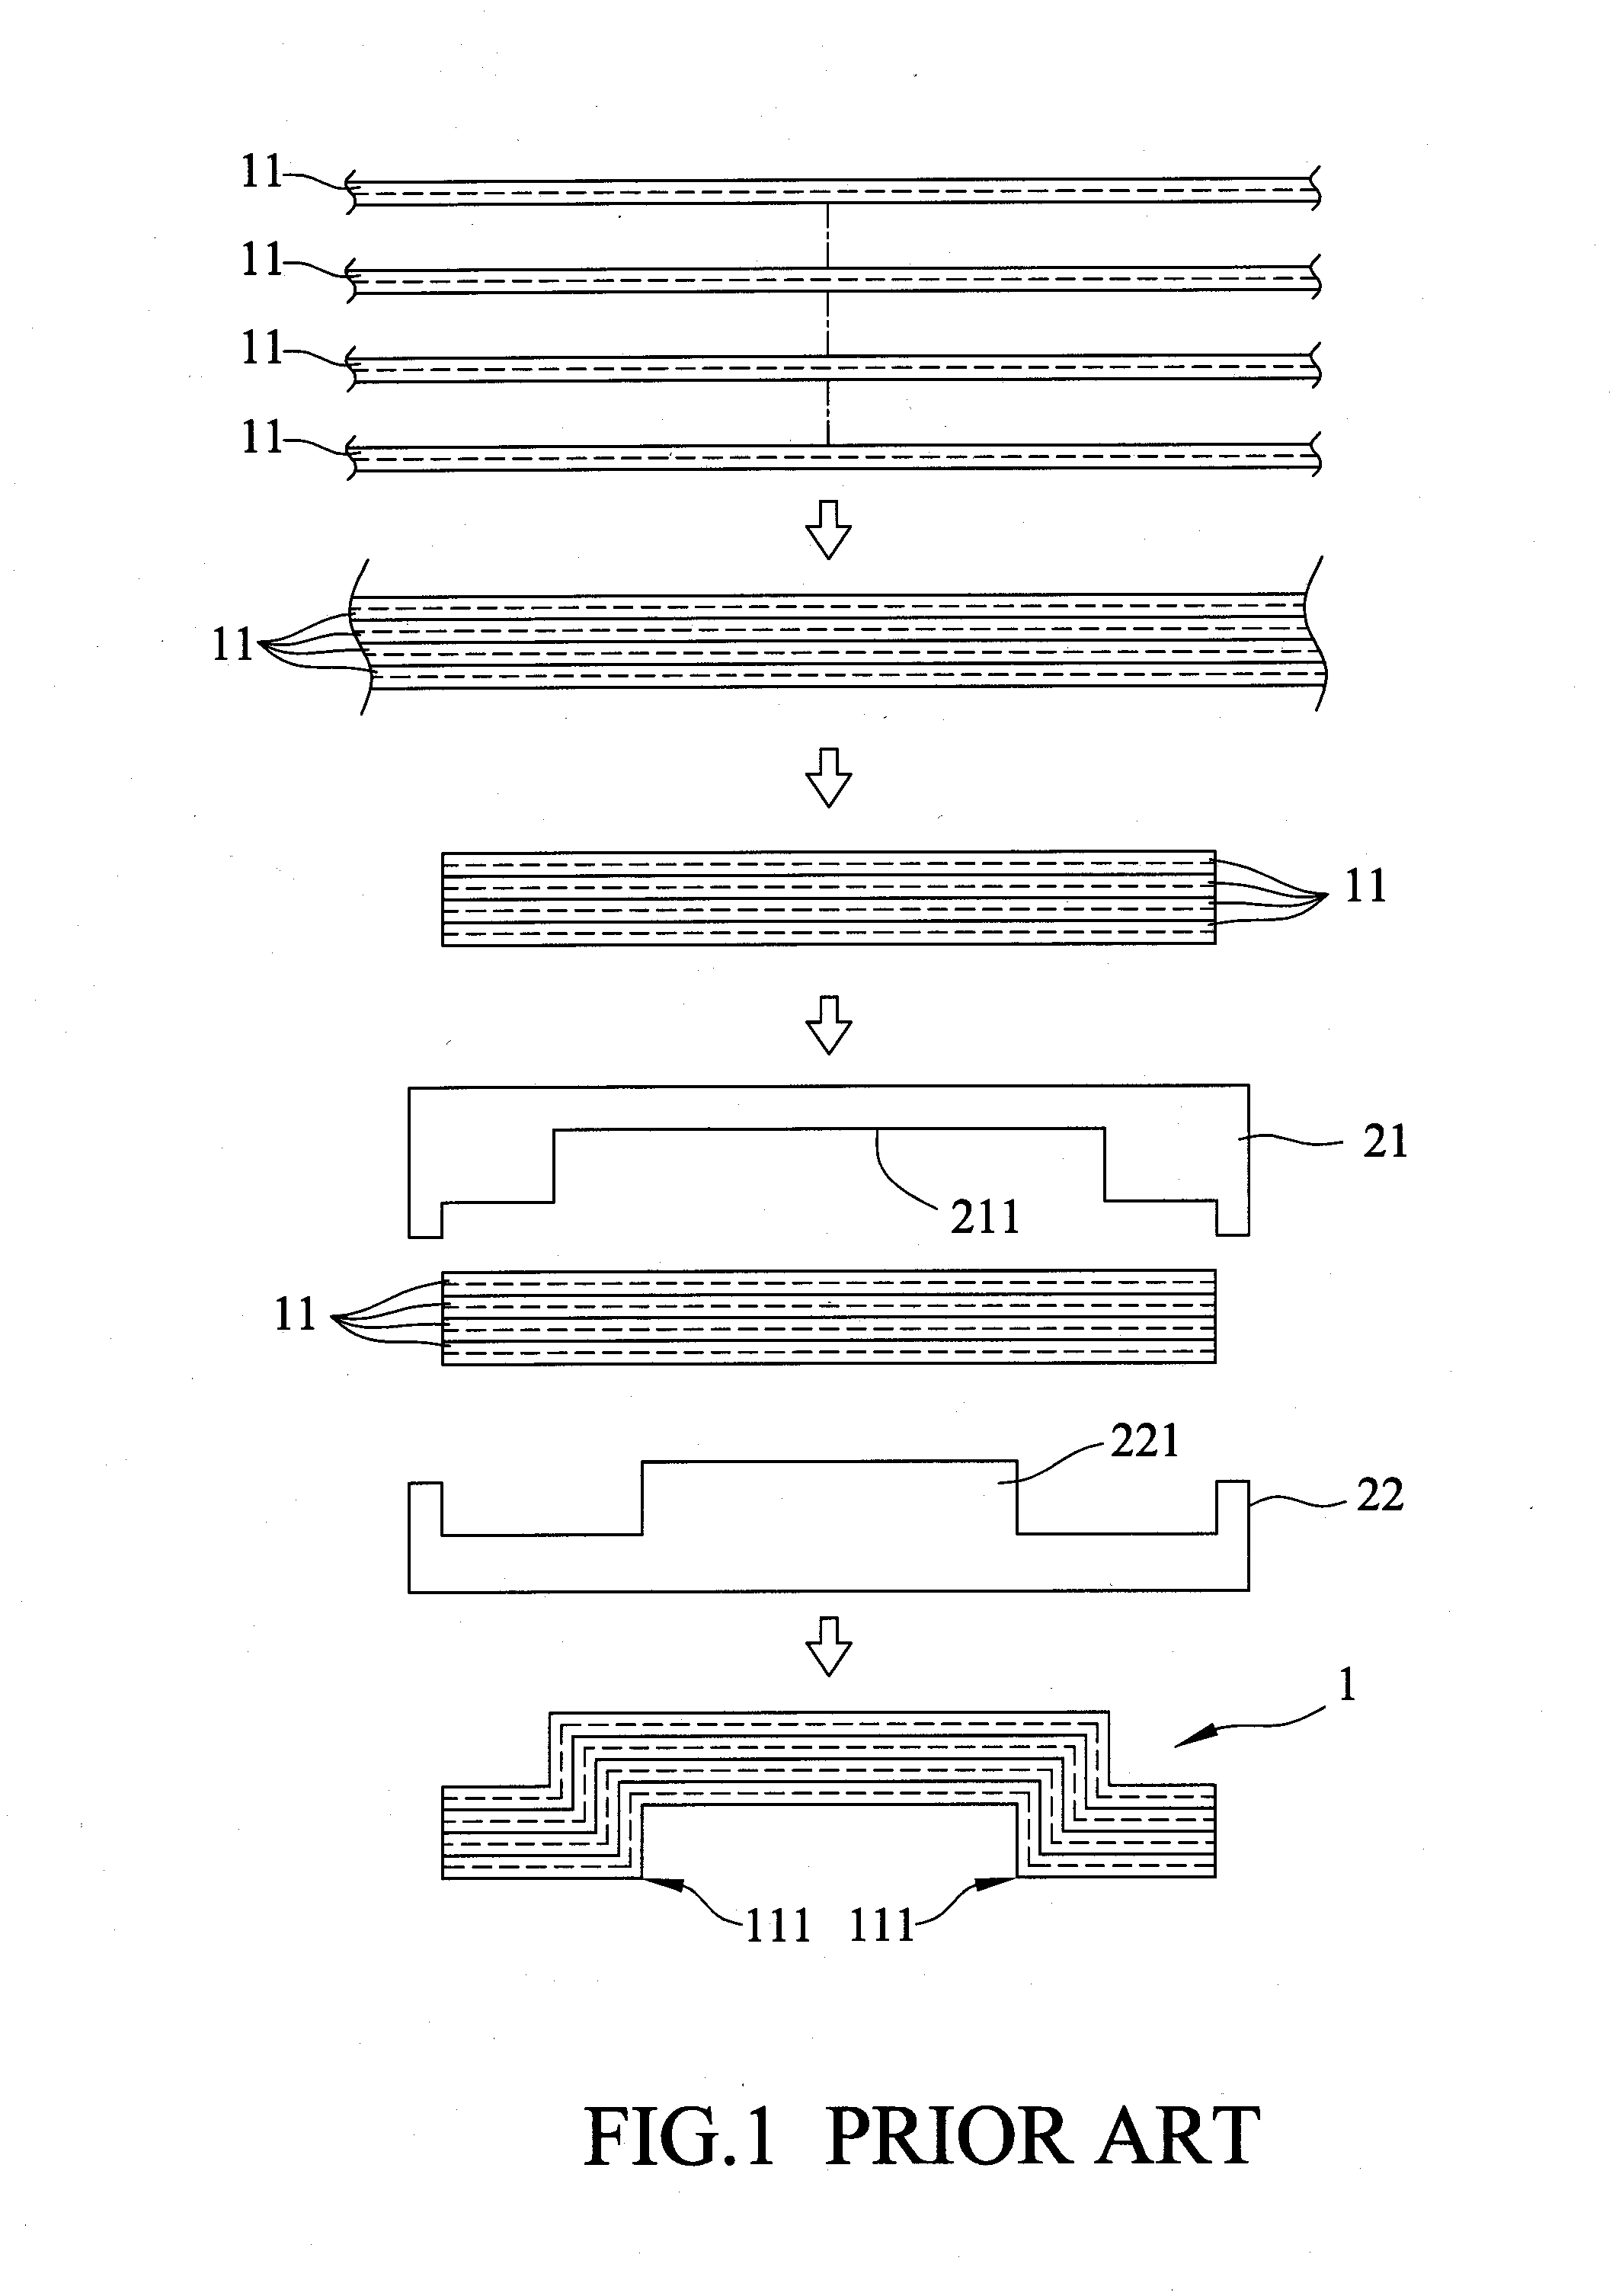 Method for making a molded composite article